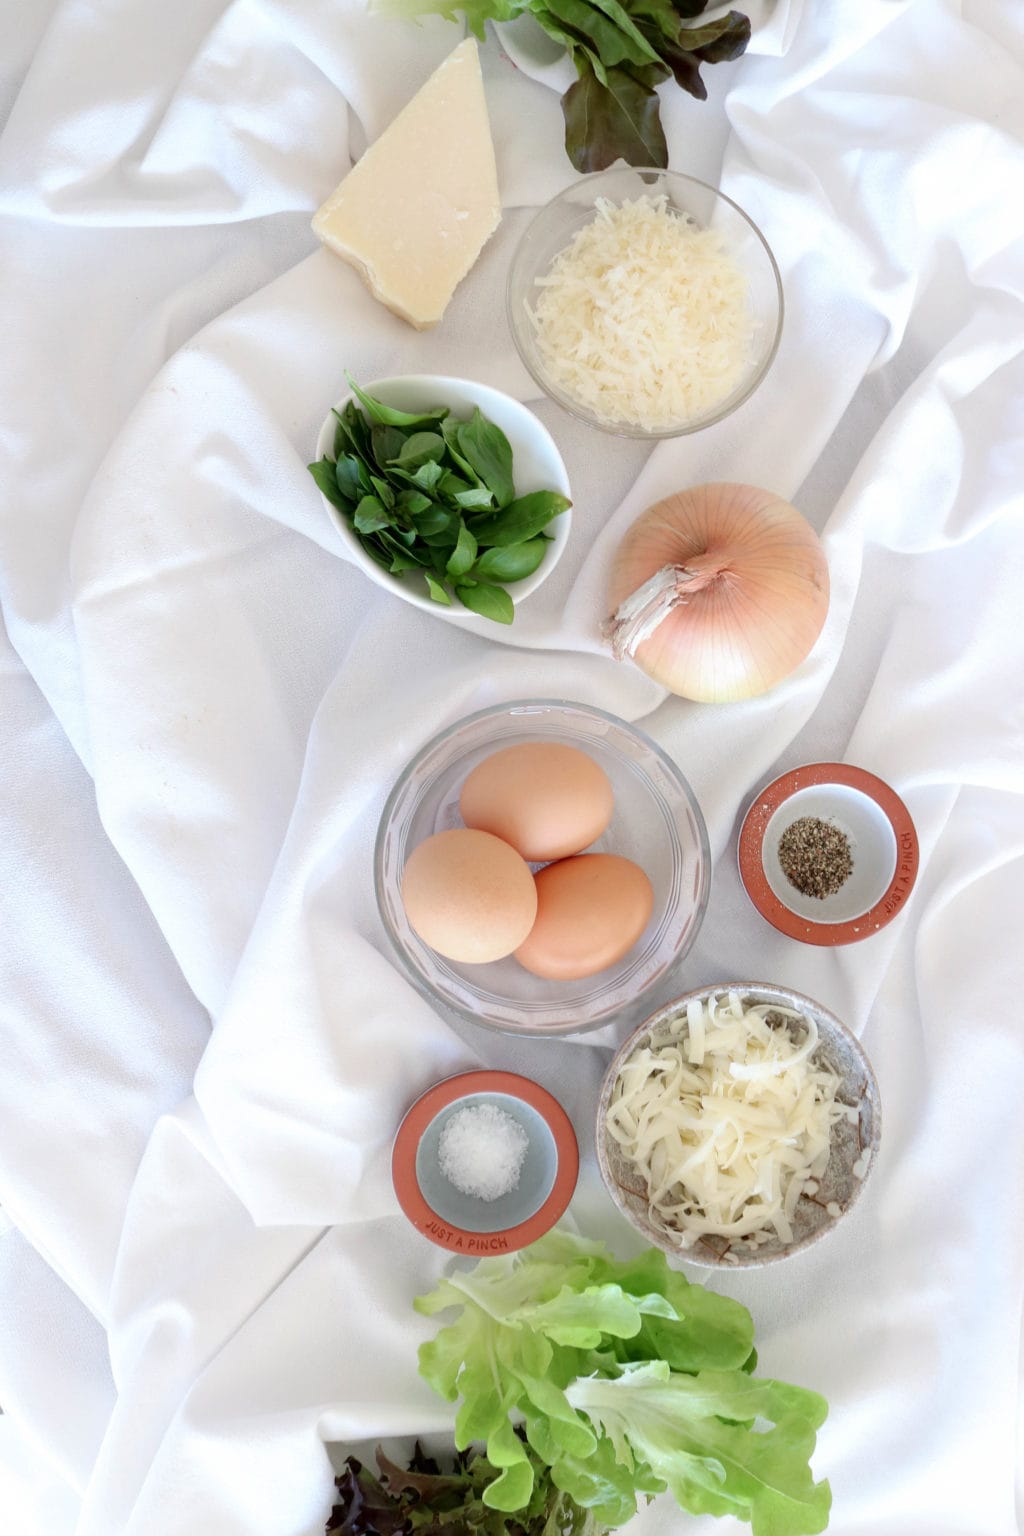 Ingredients for muffin tin frattatas are laid out on a white wrinkled tablecloth and include inspired greens lettuce, parmesan cheese, basil, onion, eggs, salt and pepper